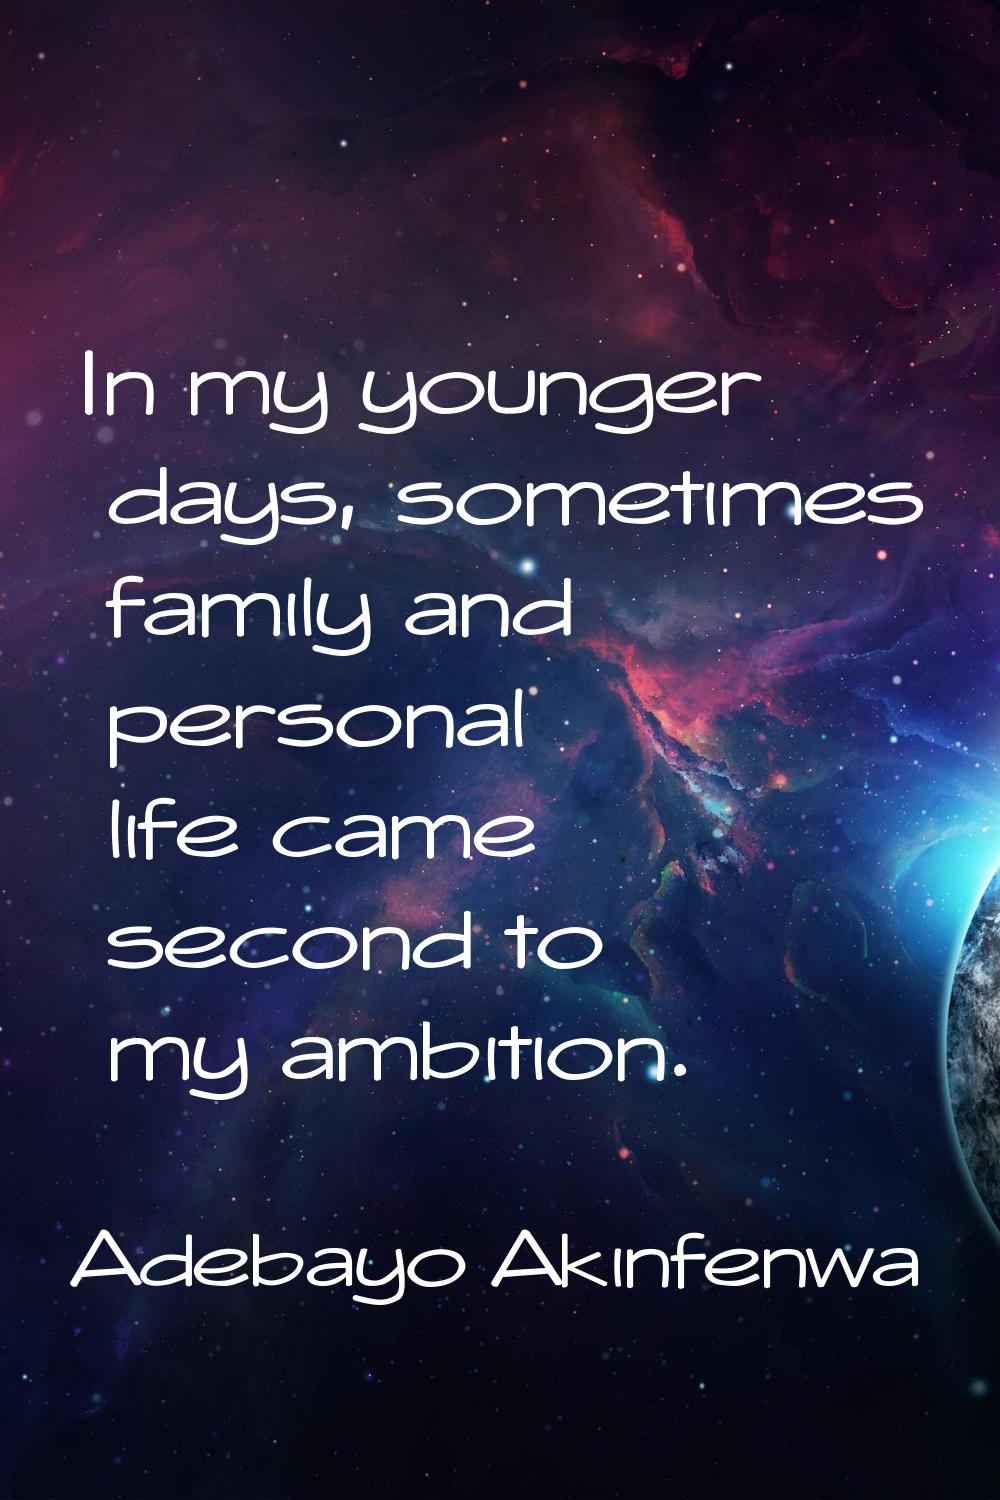 In my younger days, sometimes family and personal life came second to my ambition.